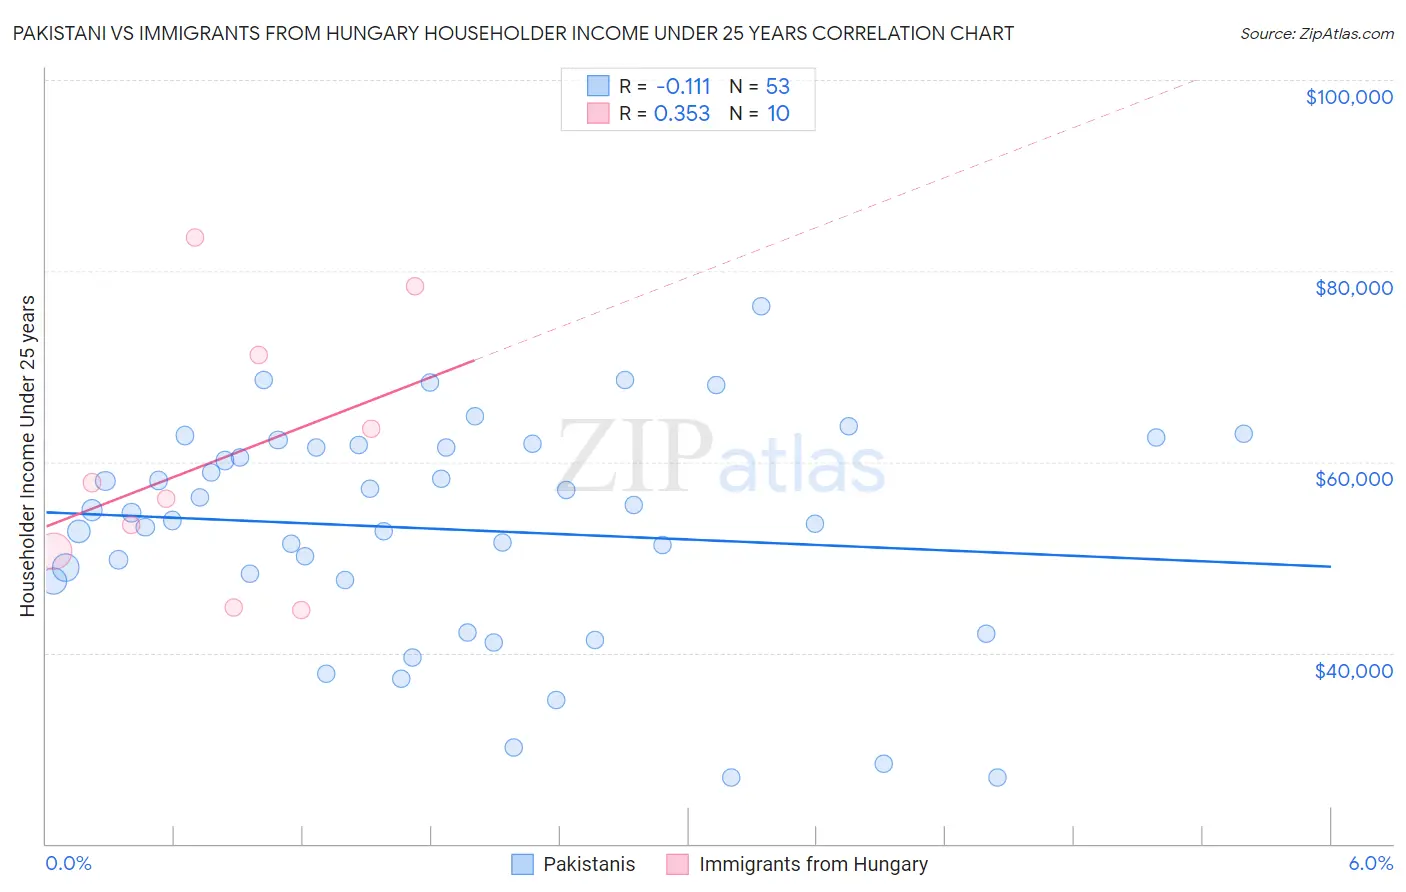 Pakistani vs Immigrants from Hungary Householder Income Under 25 years